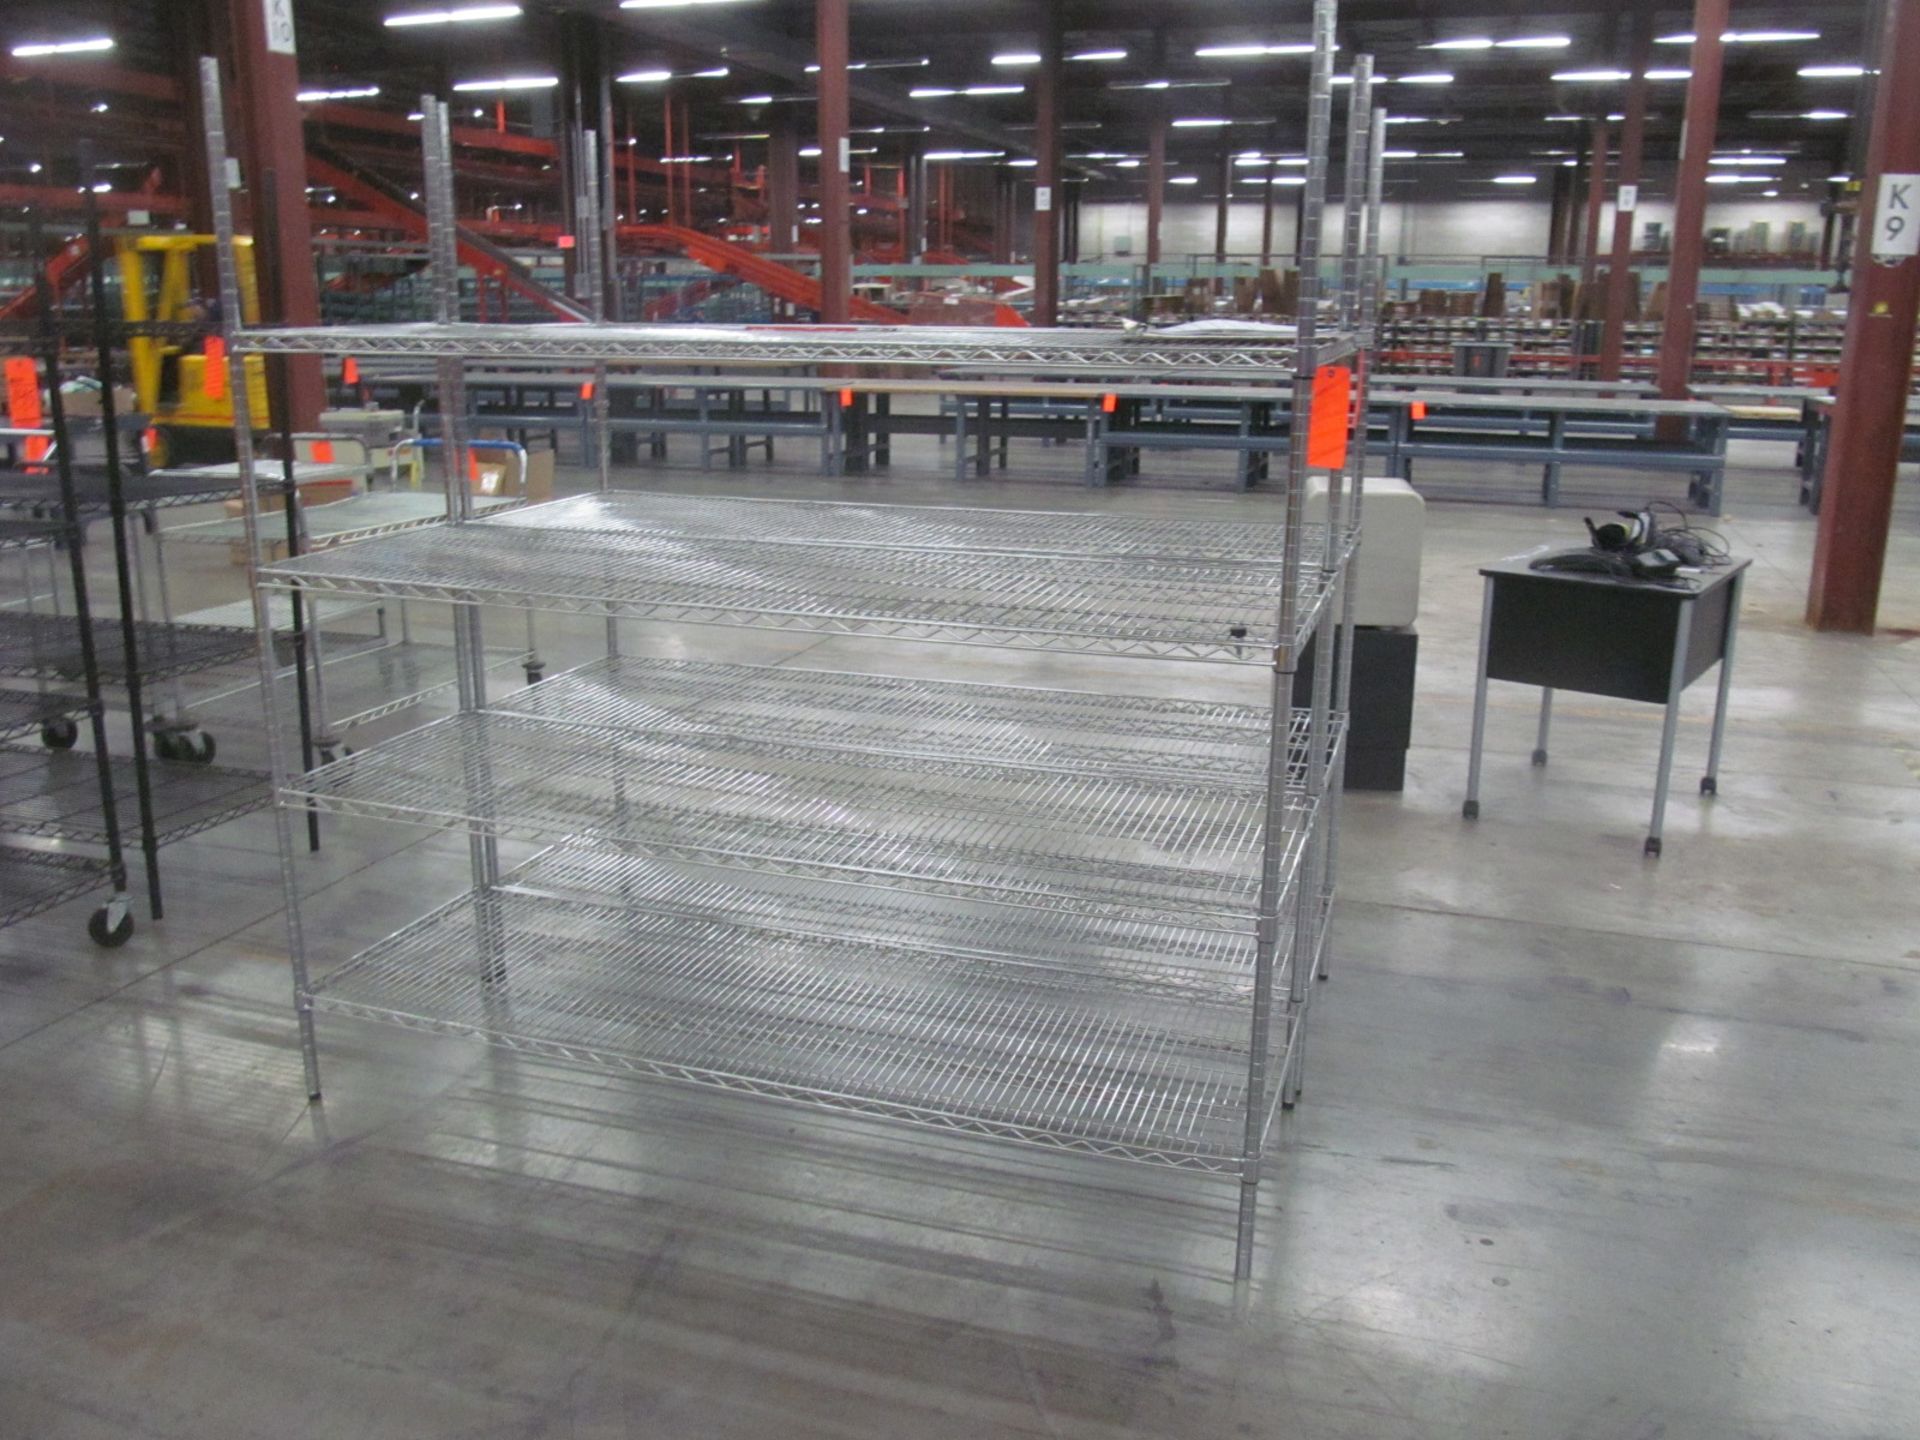 Lot of (2) metro type shelving units, chrome finished, 24" x 72" x 72", four tier - Image 2 of 2